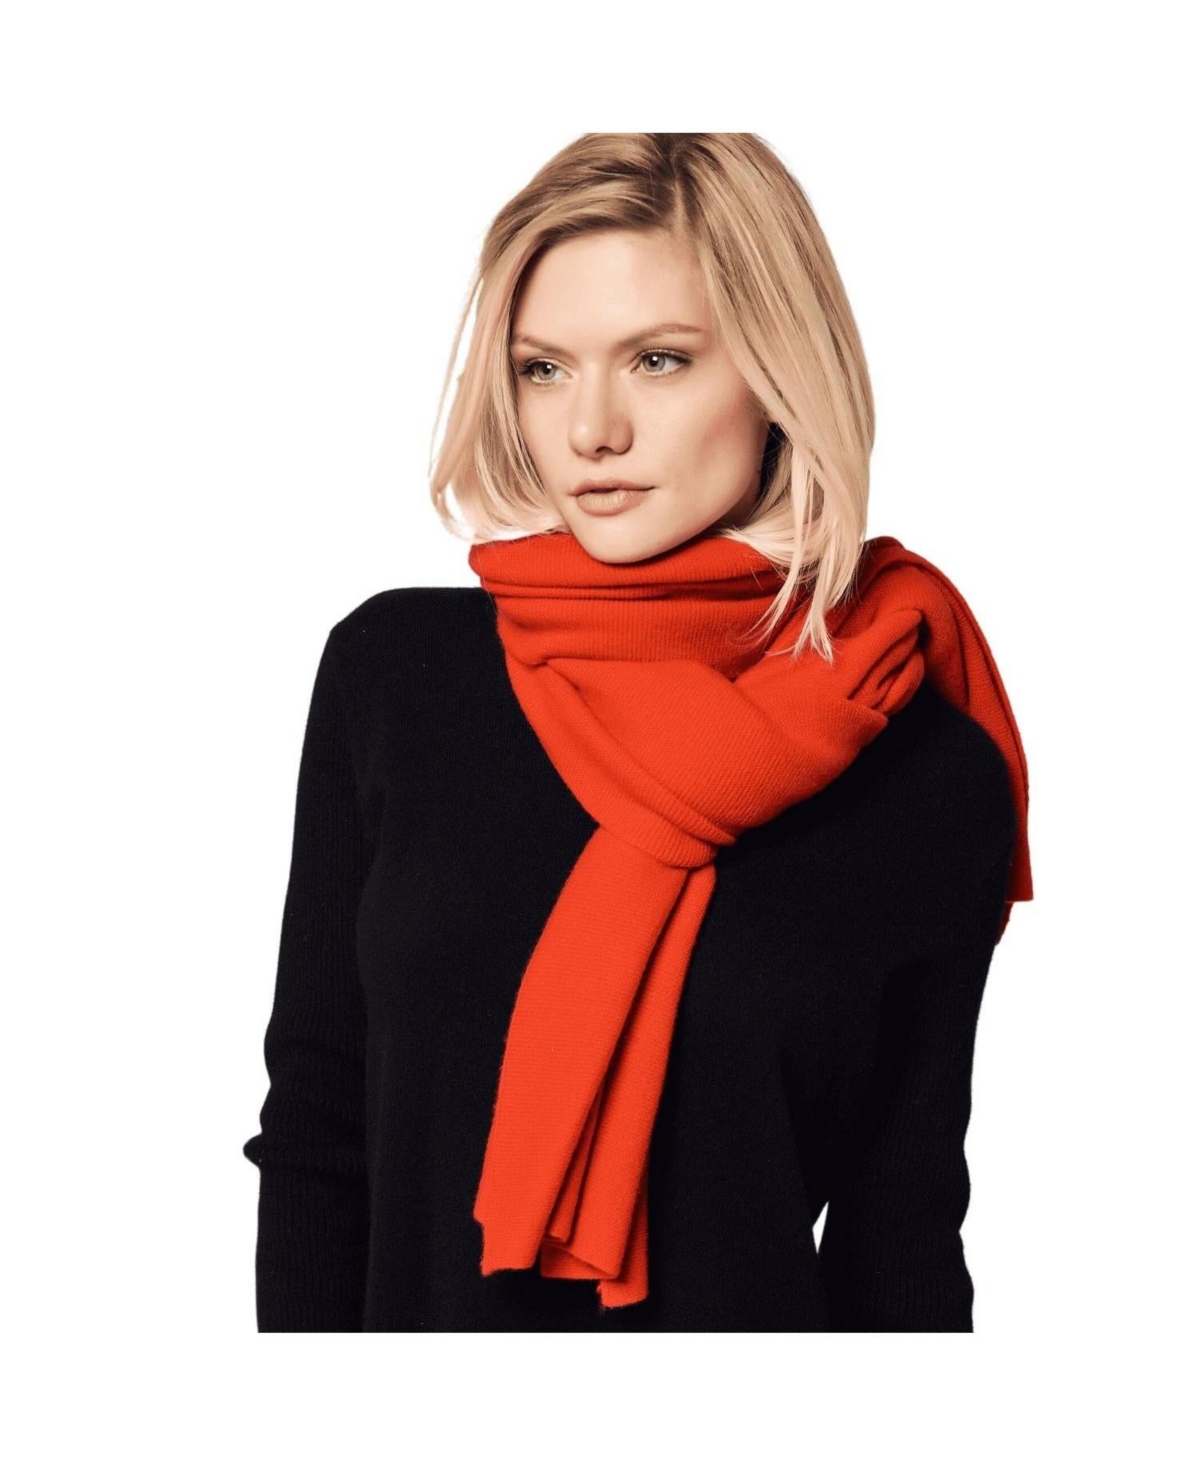 Bellemere Women's Classic Sharp Print Cashmere Scarf - Red